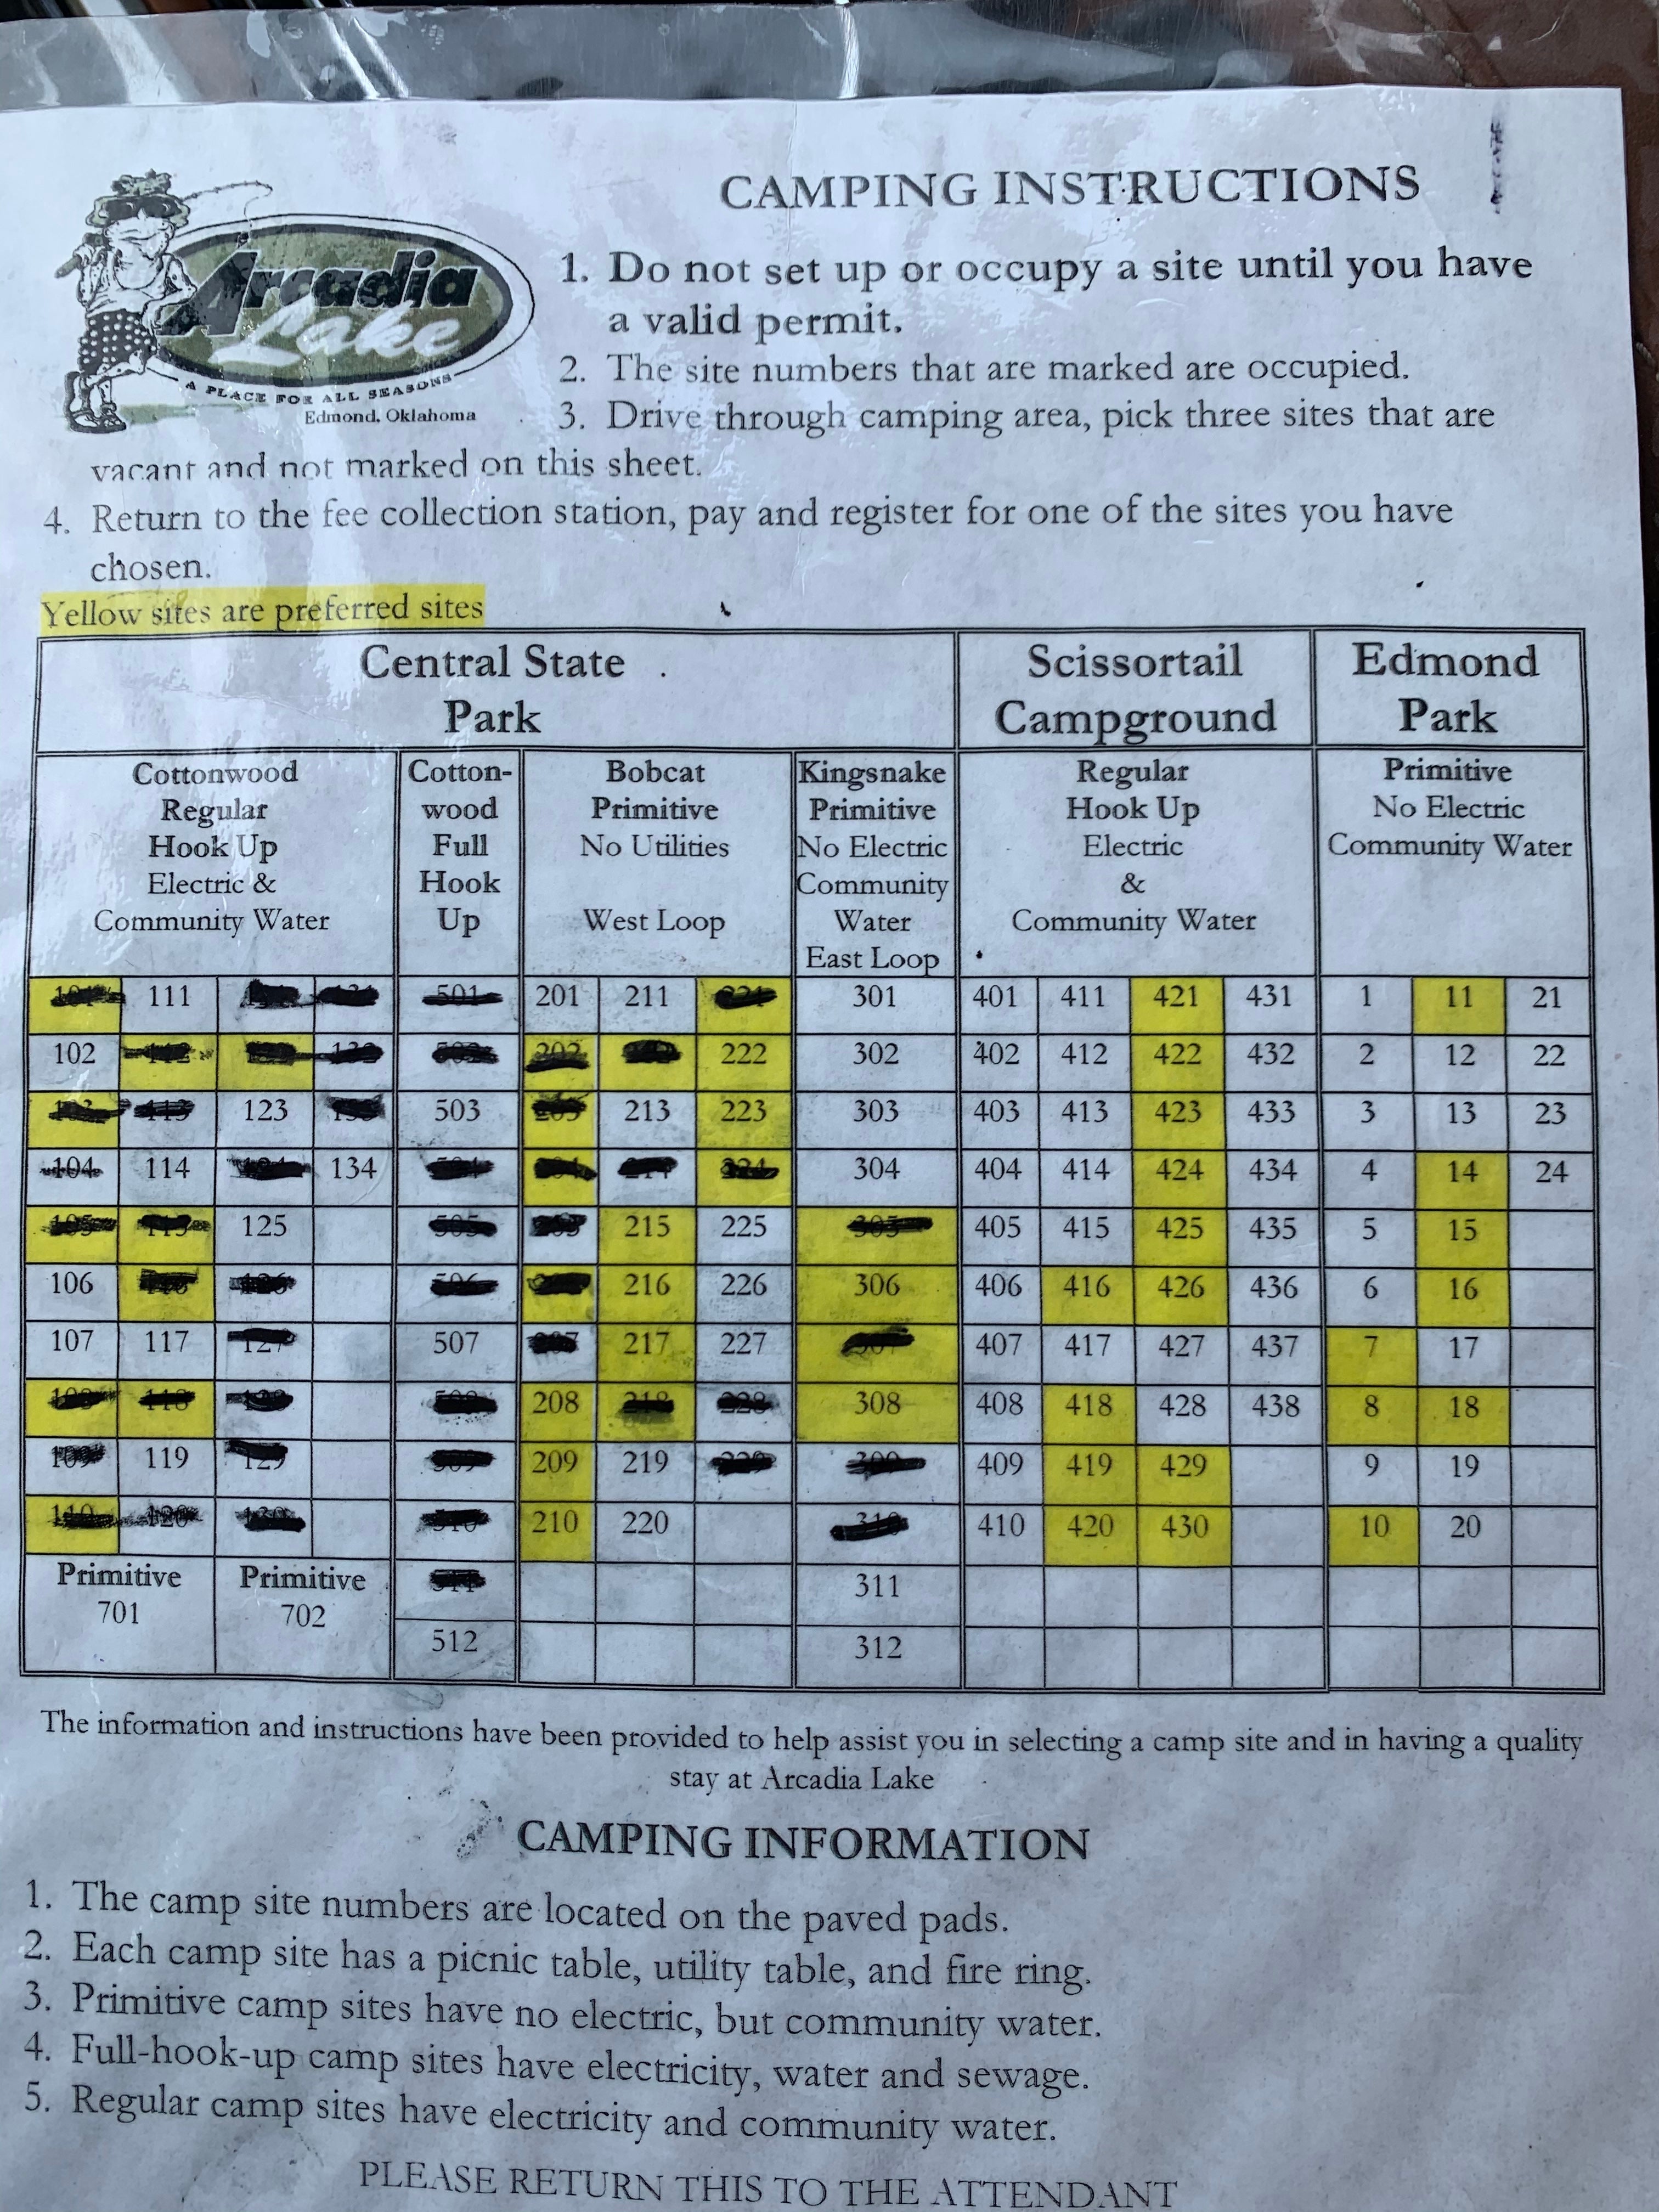 List of camping options and information from the gate house.